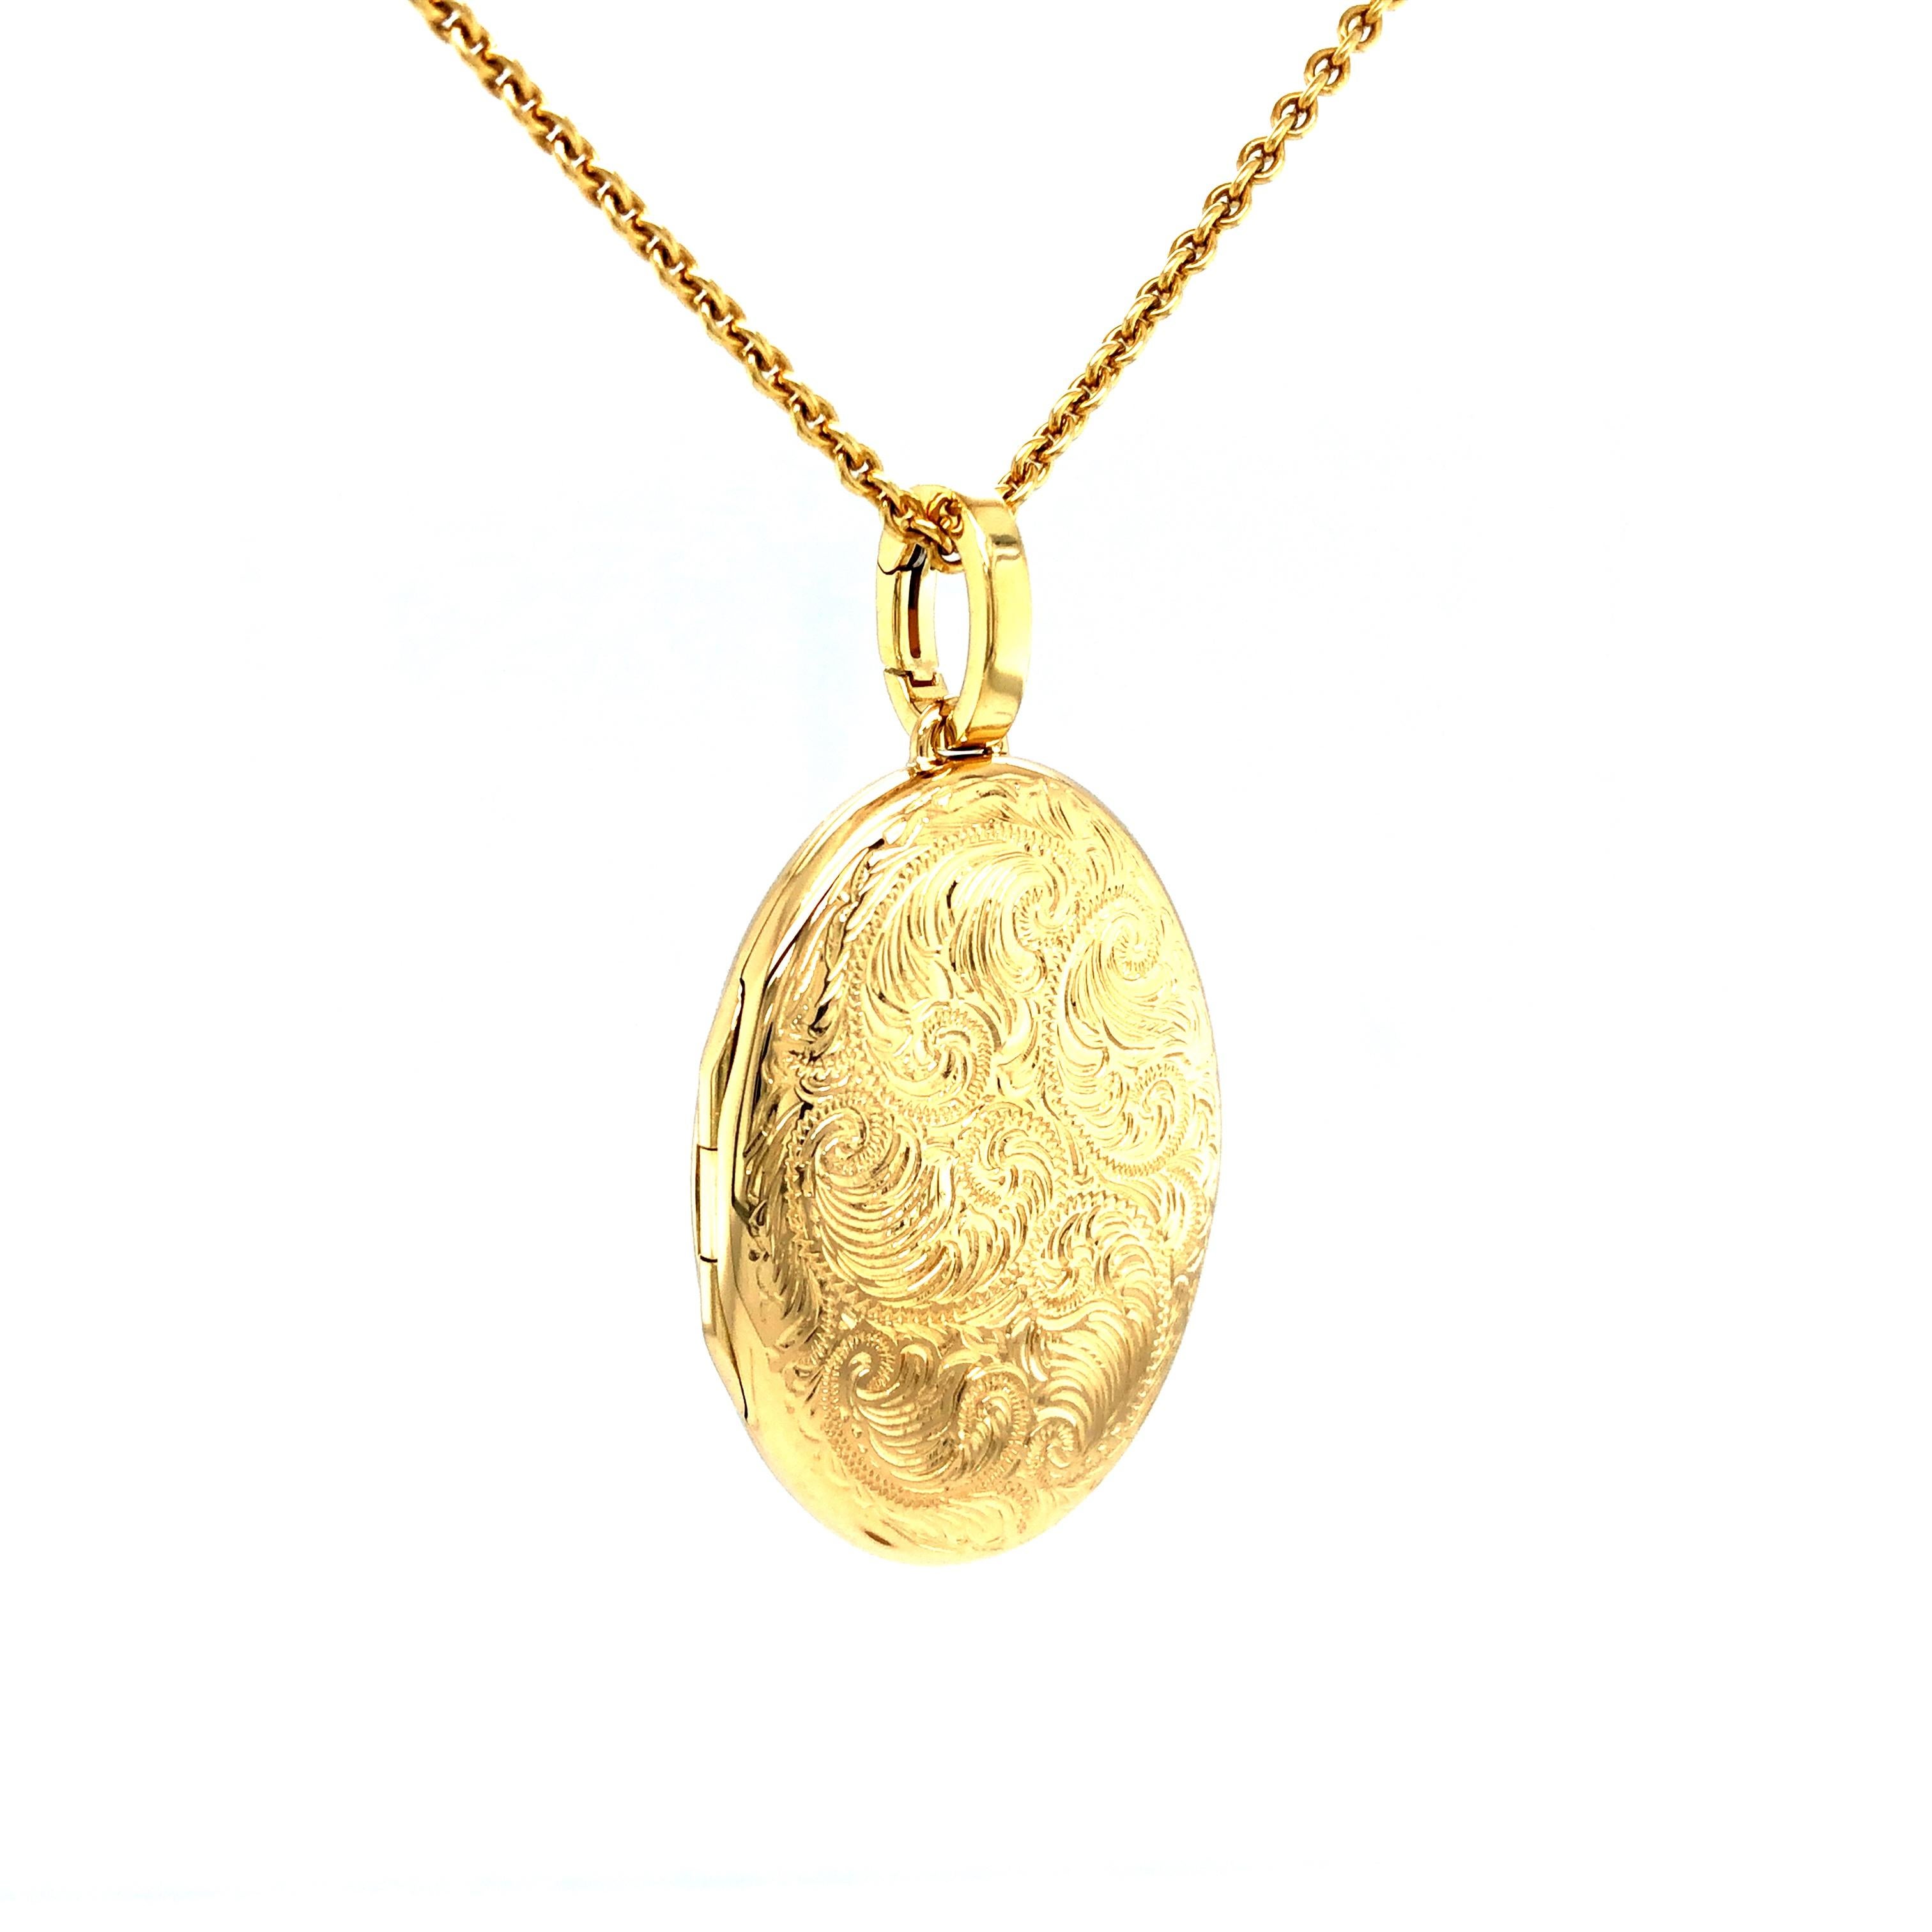 Belle Époque Oval Locket Pendant Necklace Scroll Engraving 18k Yellow Gold 23.0 x 32.0 mm For Sale